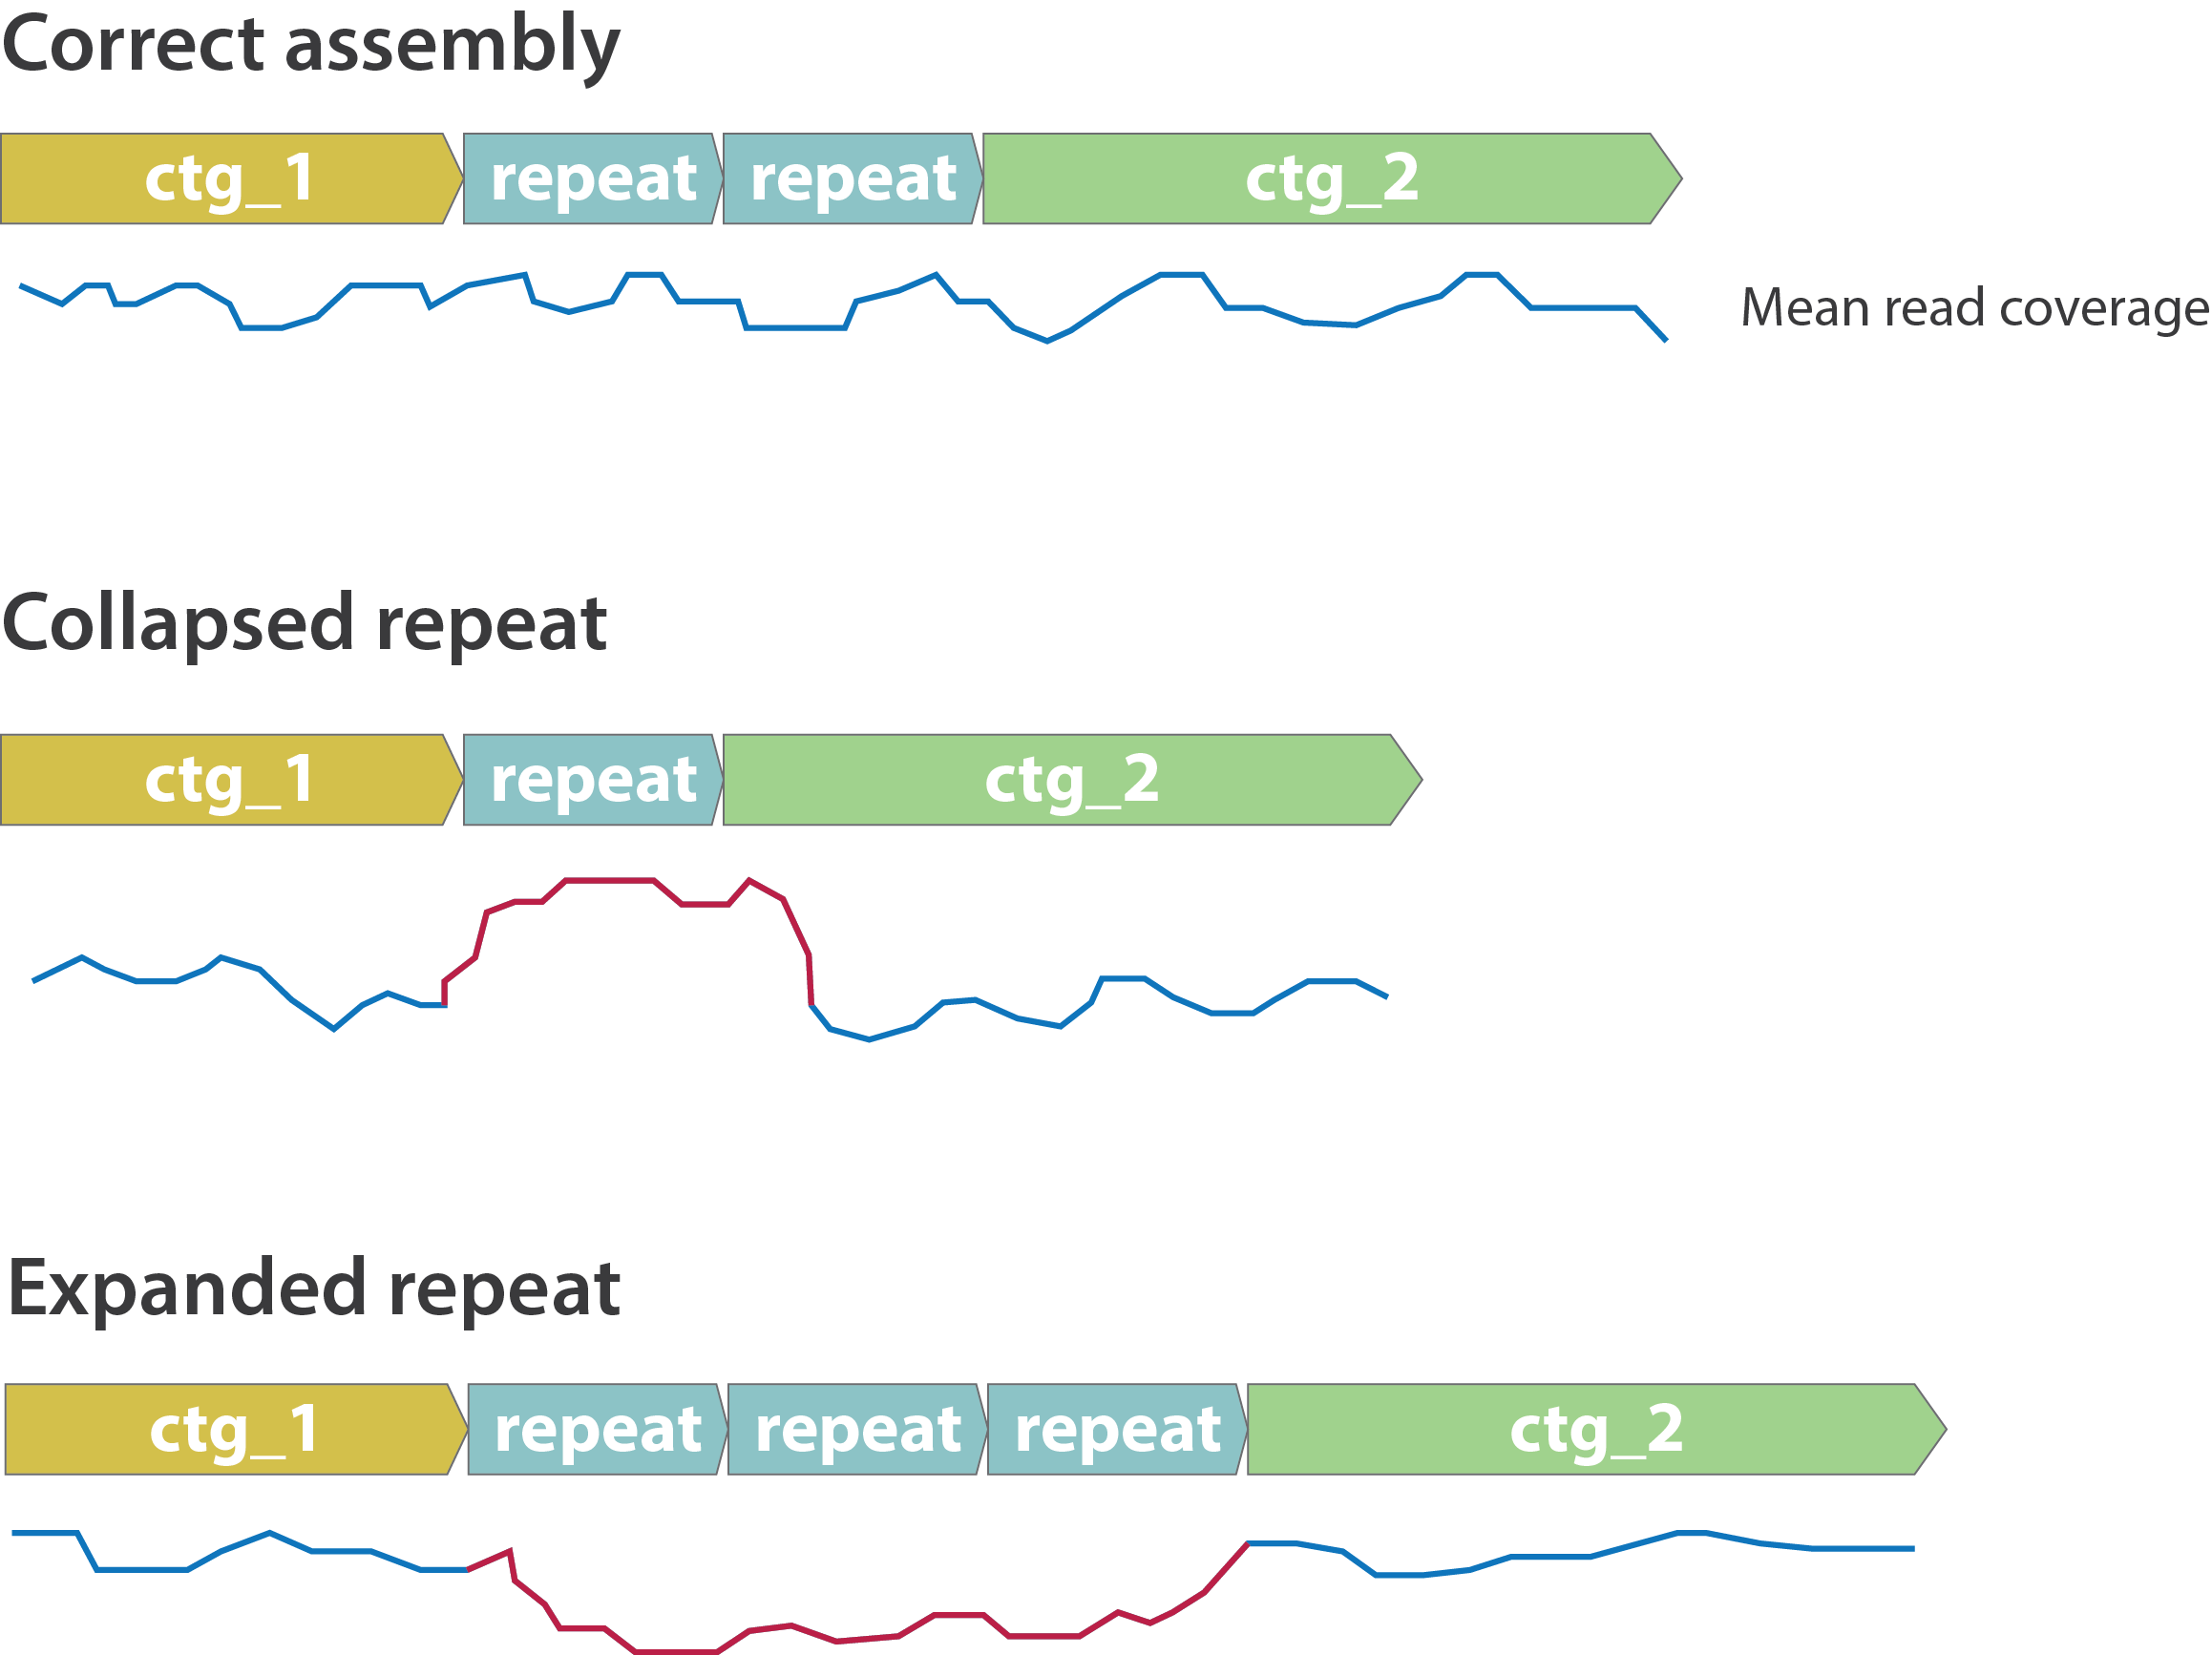 Illustration of collapsed and expanded repeats assembly errors.